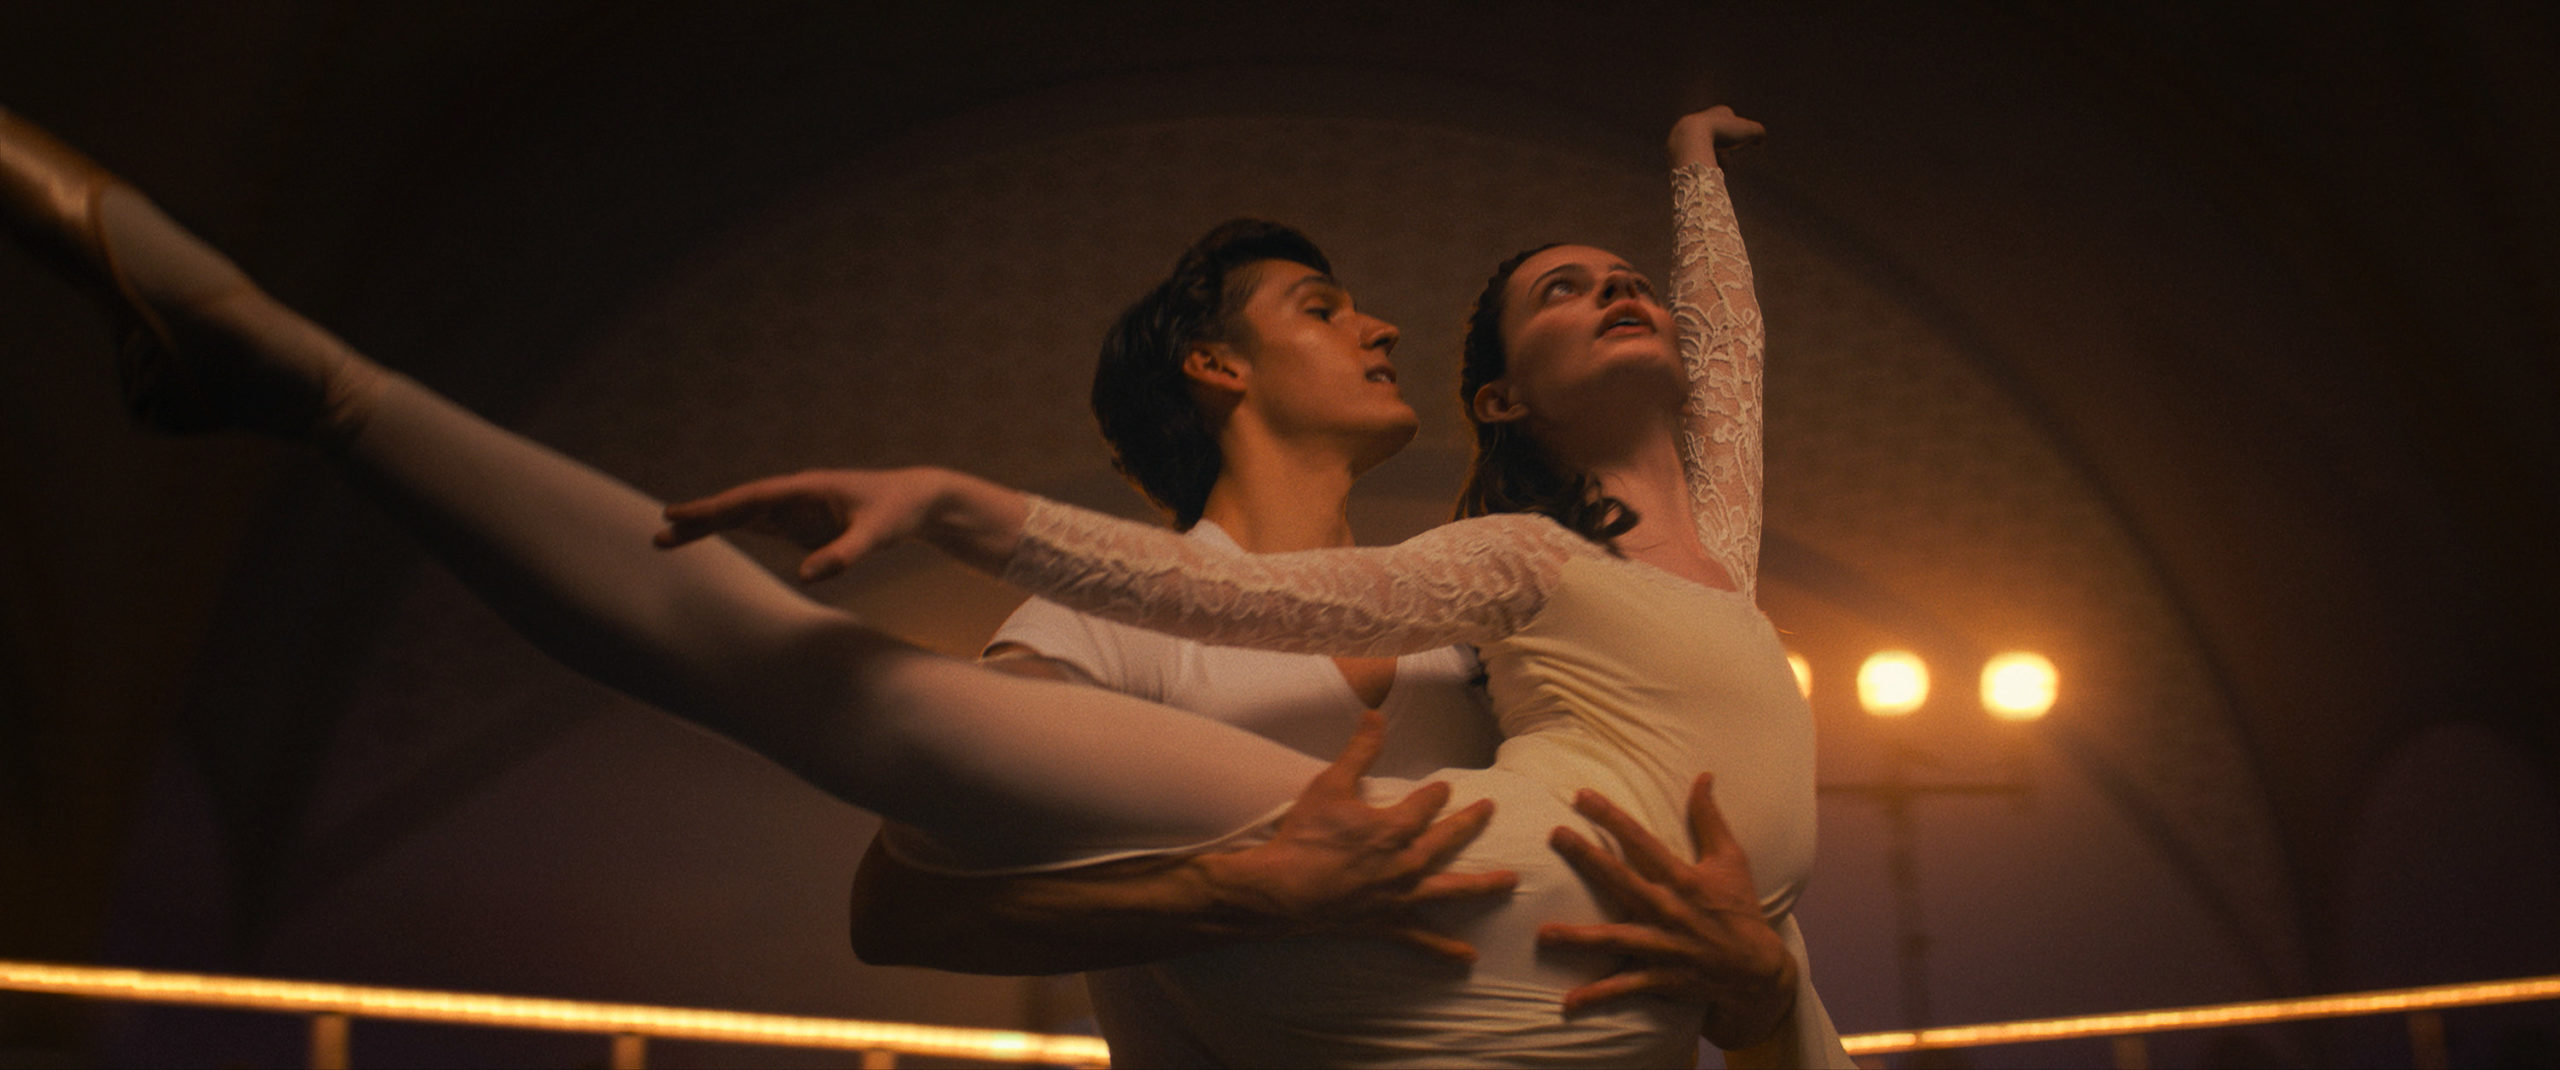 Sarah Adina Smith on Filming a Different Ballet Film with Amazon’s Birds of Paradise [Exclusive Interview]